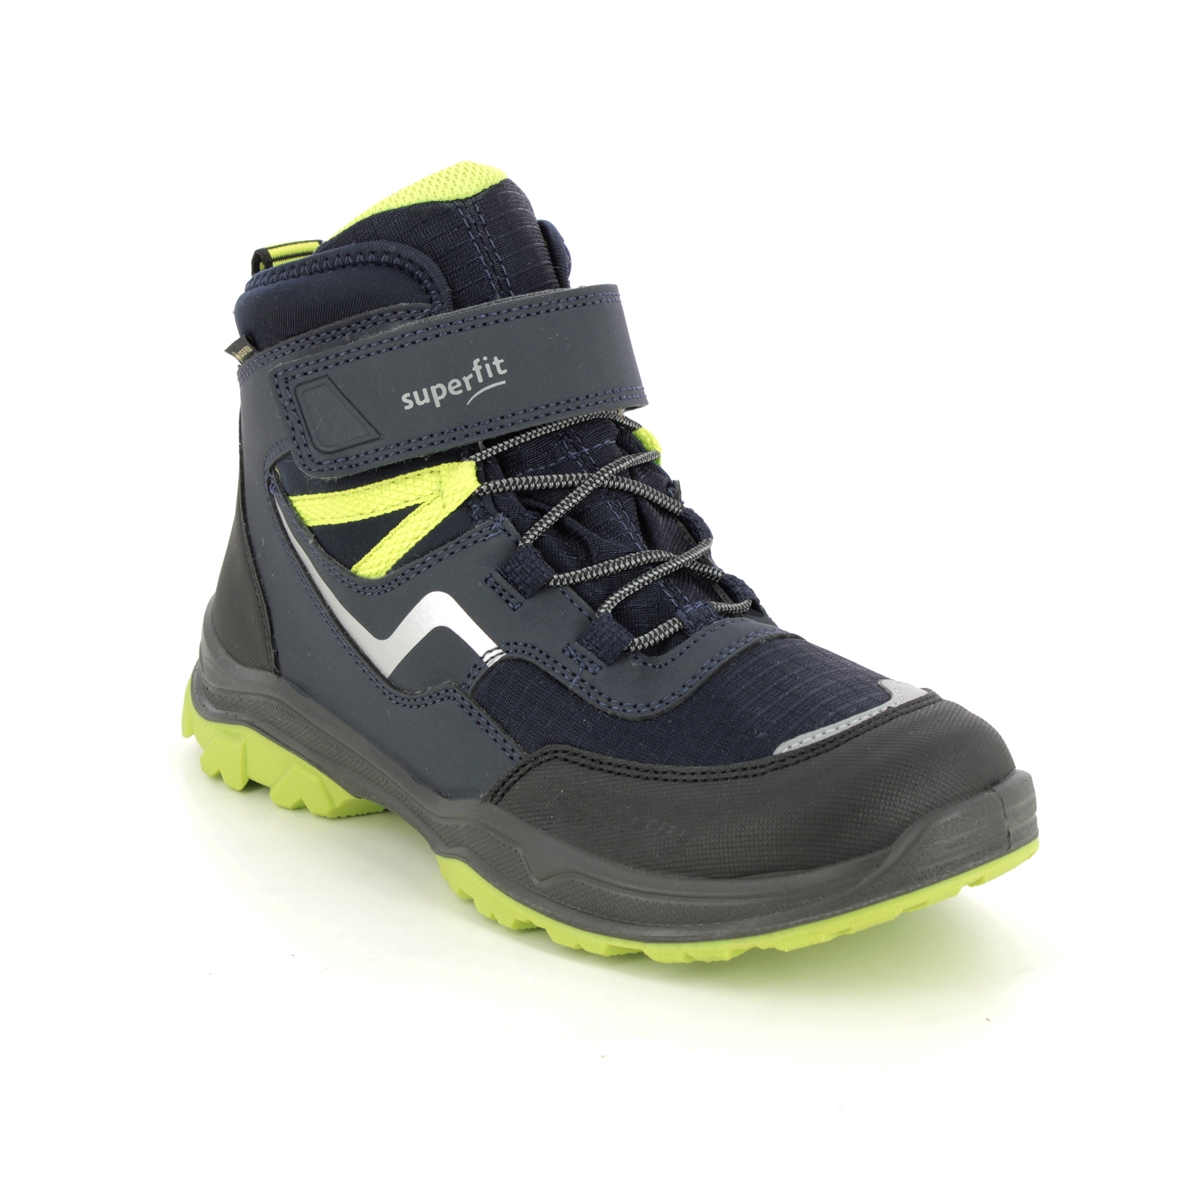 Superfit Jupiter Bungee Gtx Navy Lime Kids Boys Boots 1000074-8000 In Size 35 In Plain Navy Lime For kids